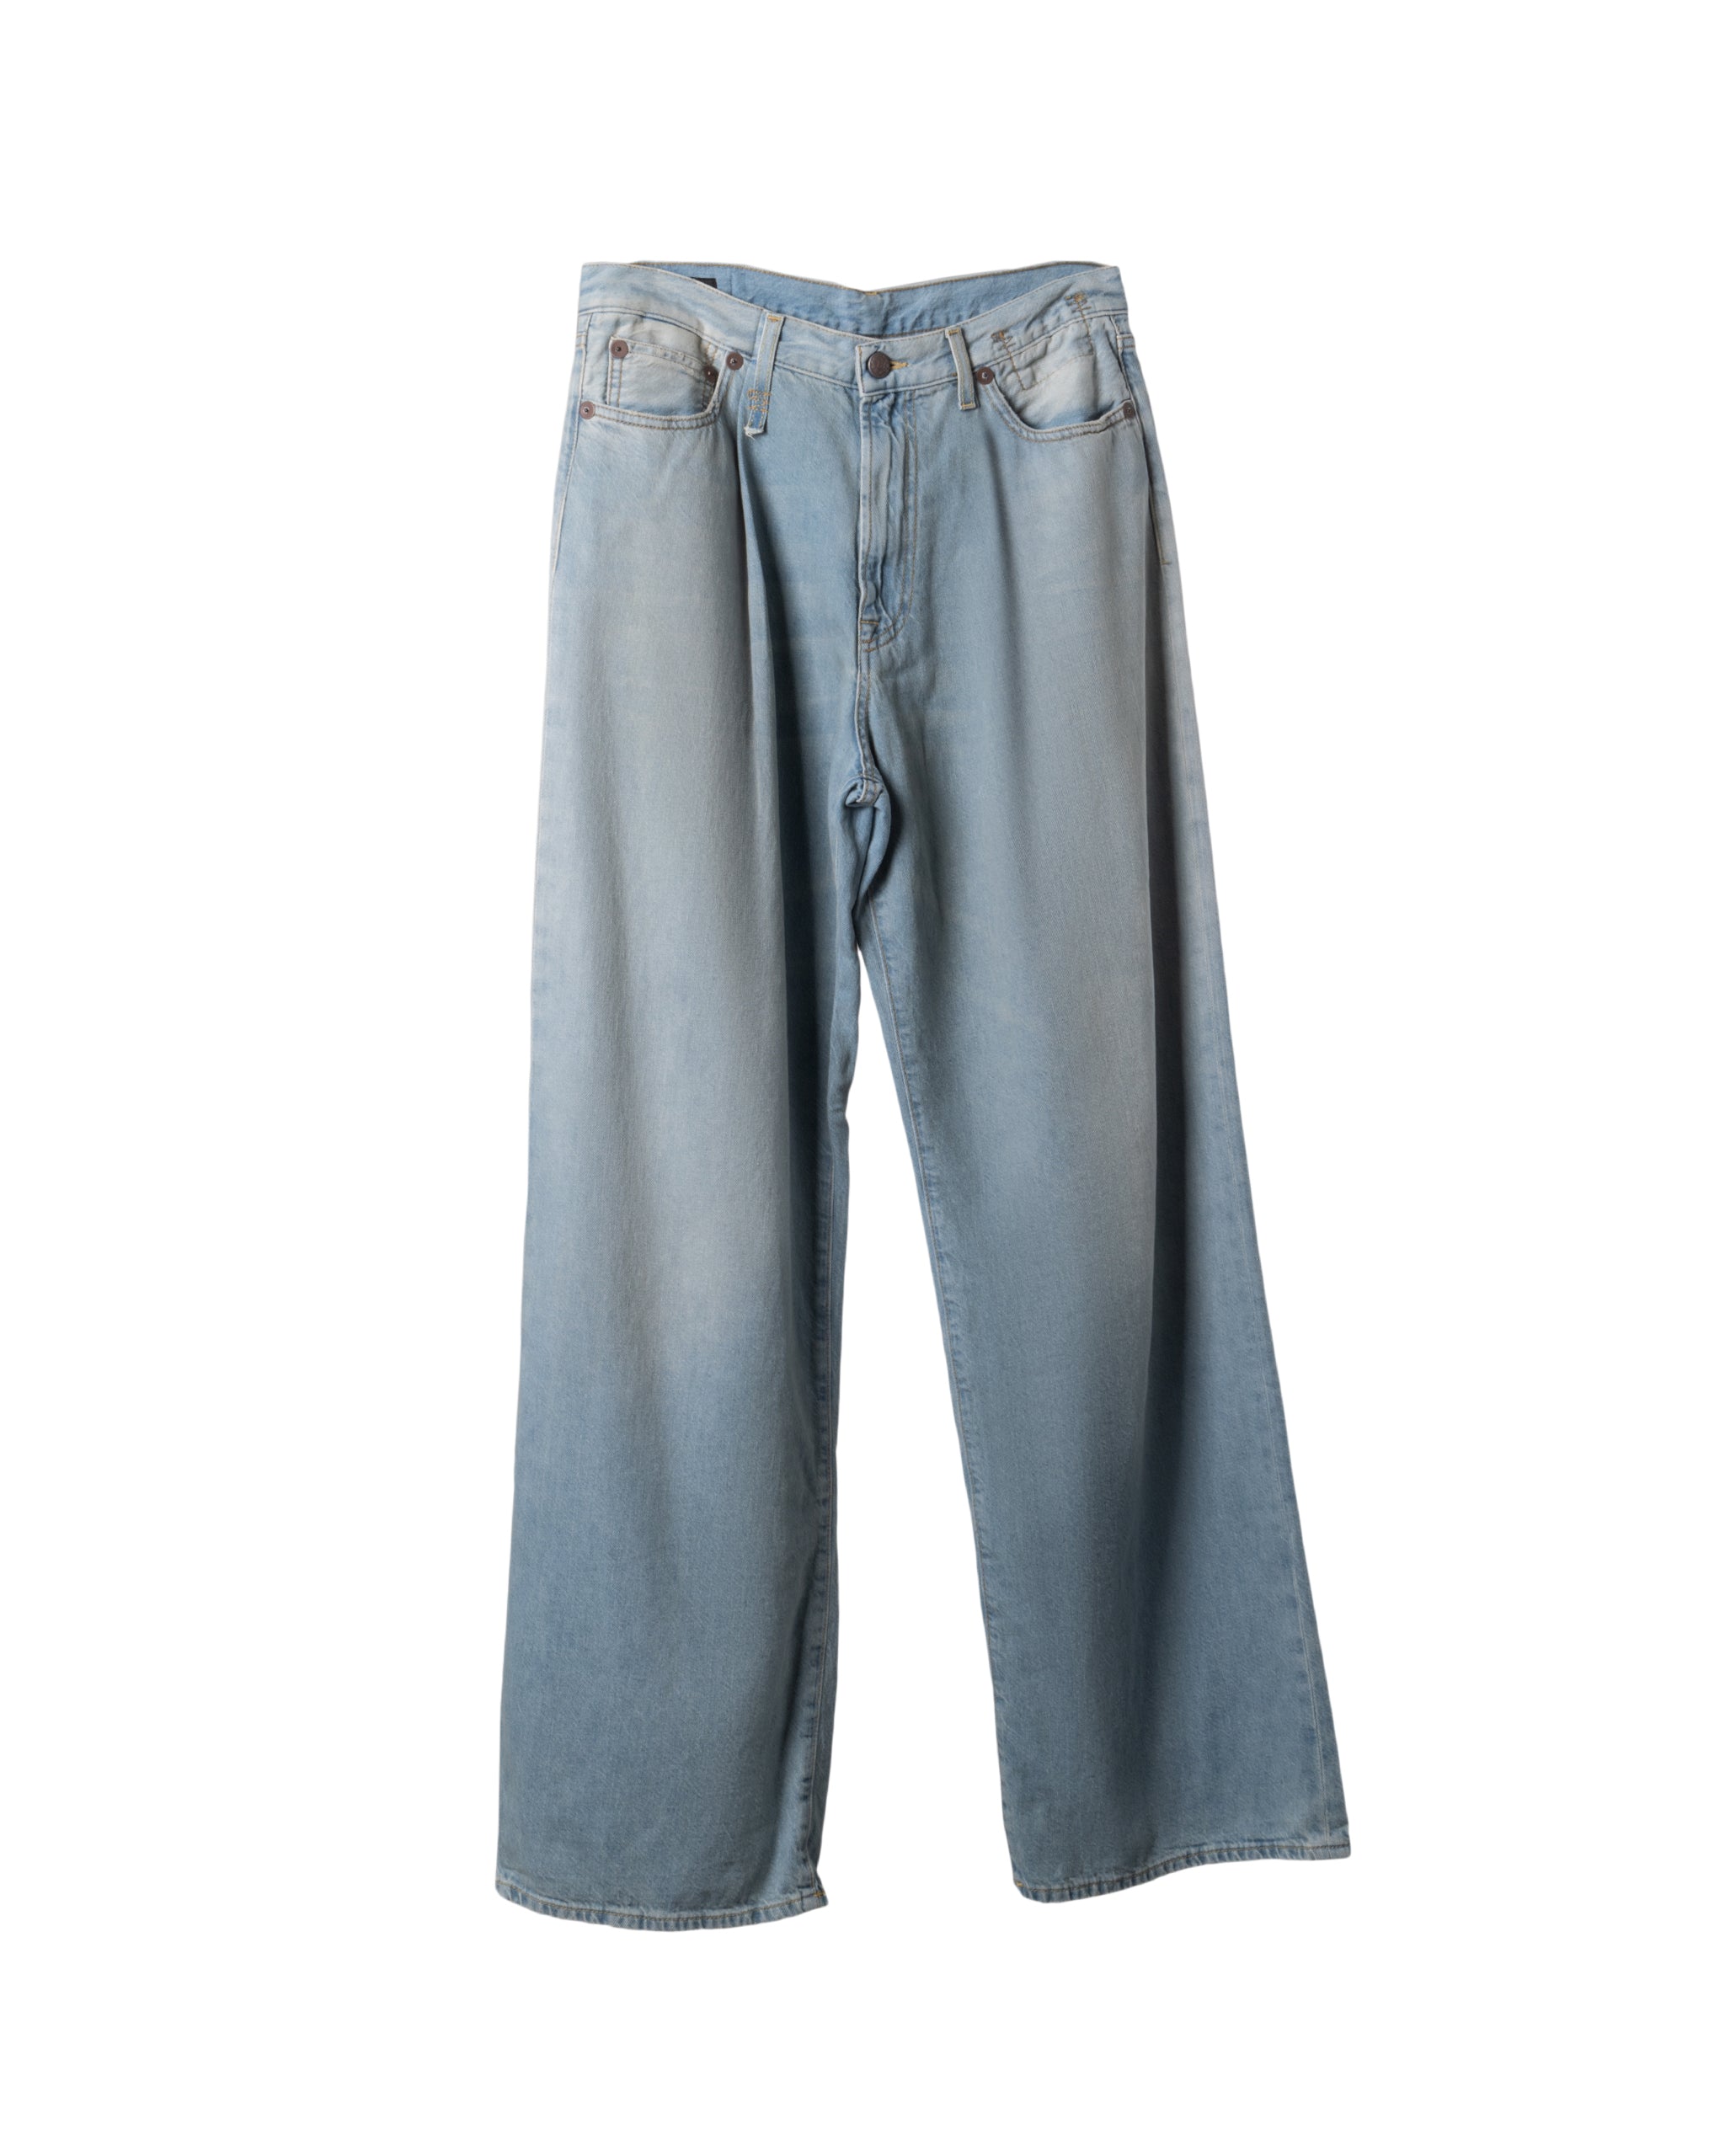 DAMPN PLATED WIDE LEG JEANS